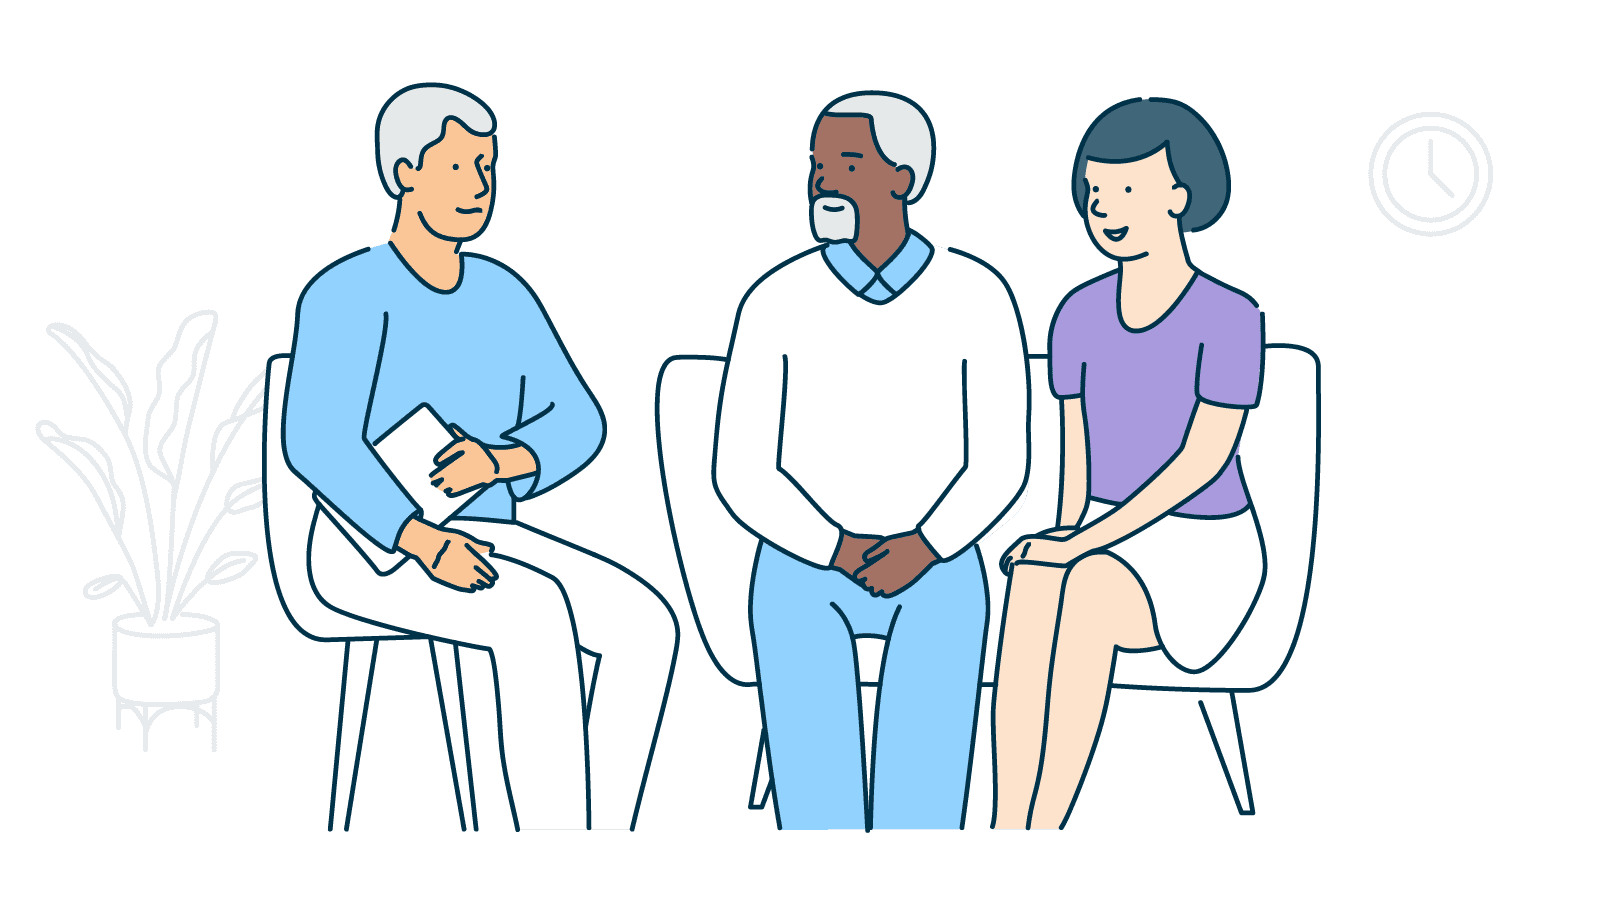 An illustration showing a couple sitting and speaking with a professional